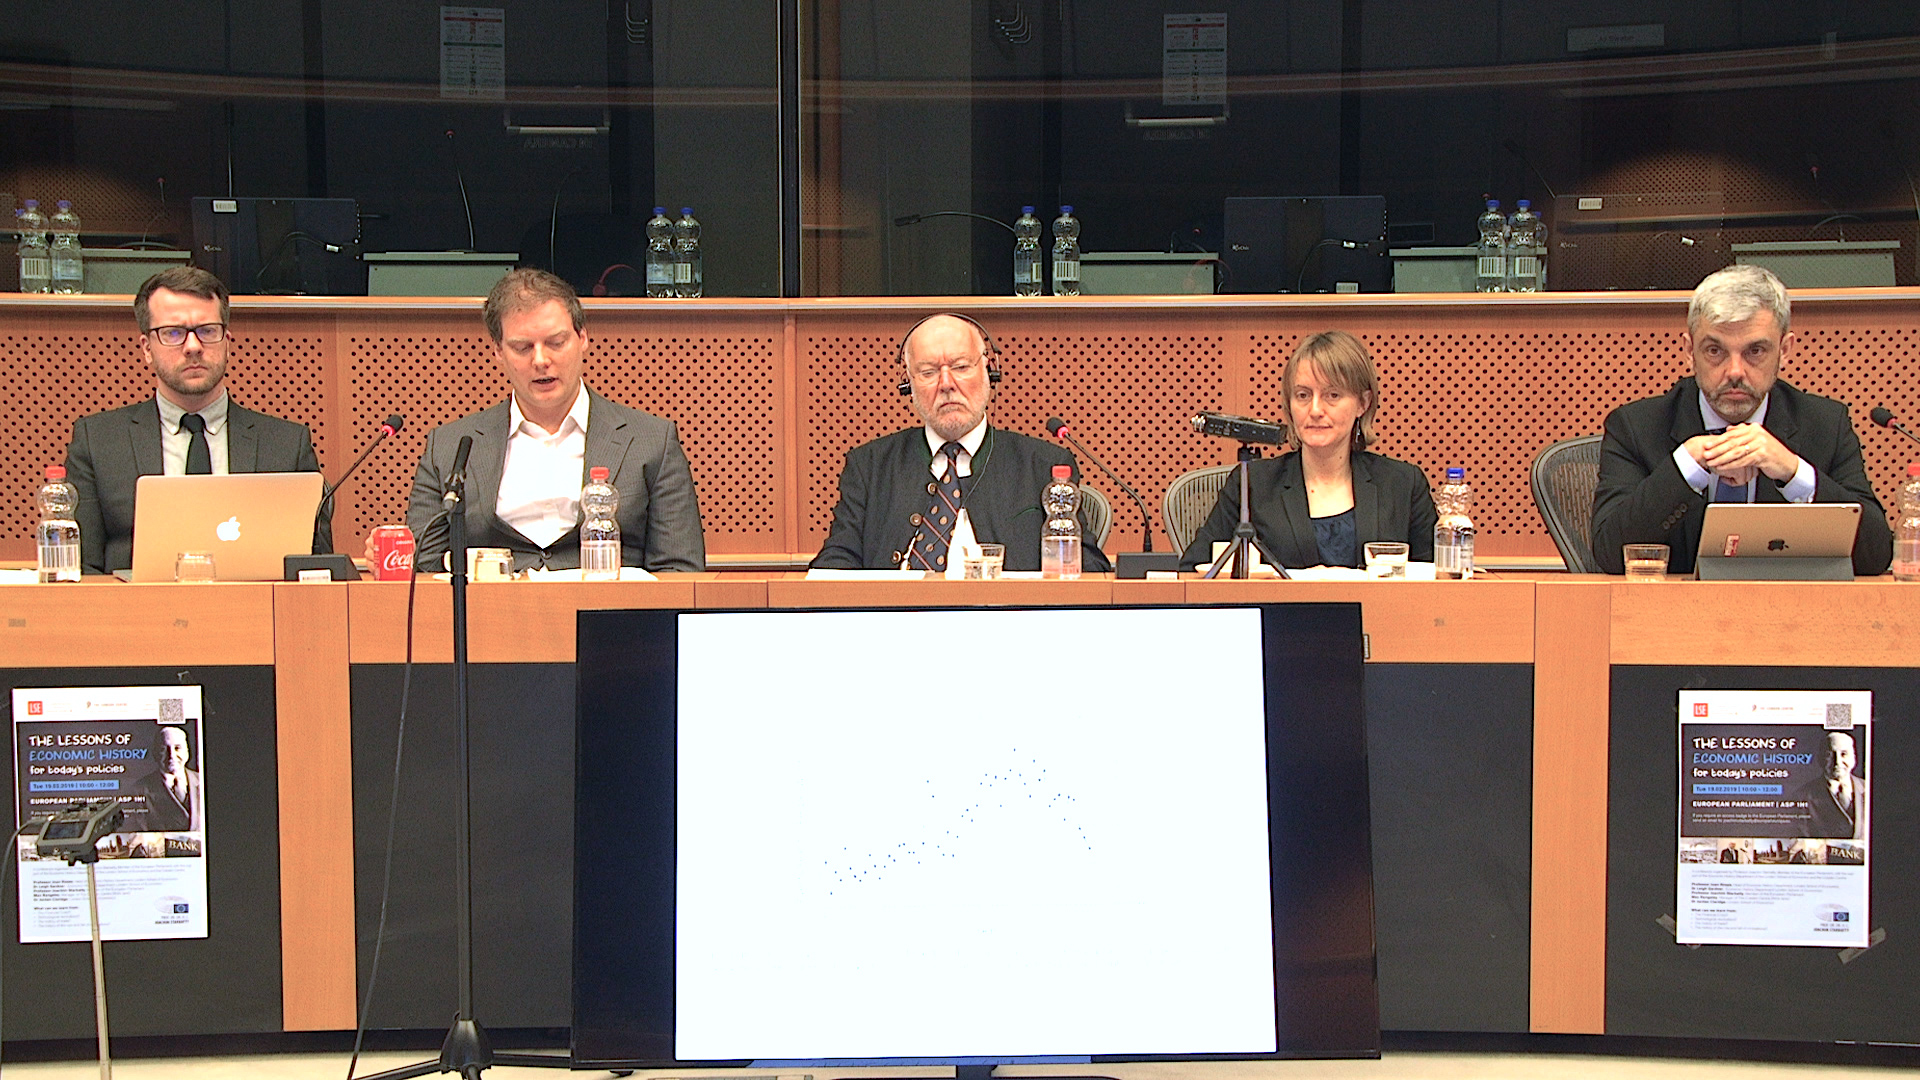 “The Lessons of Economic History” in the European Parliament